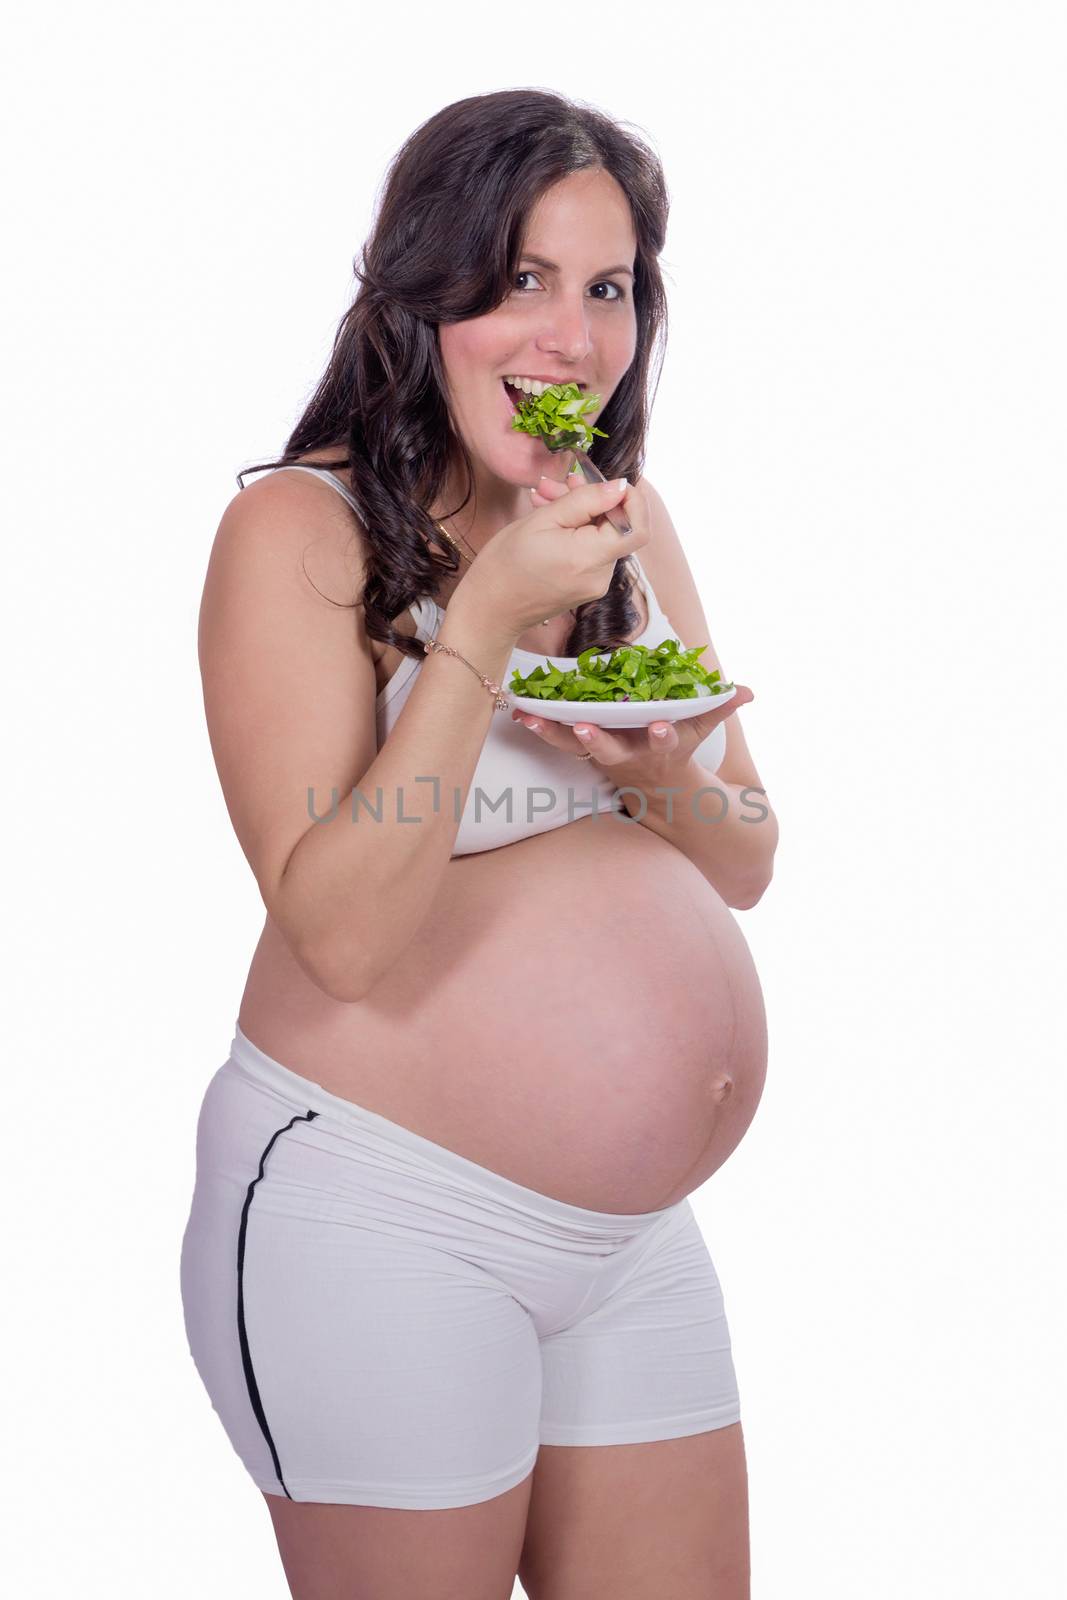 A pregnant woman with to eating salad and wearing white clothes.